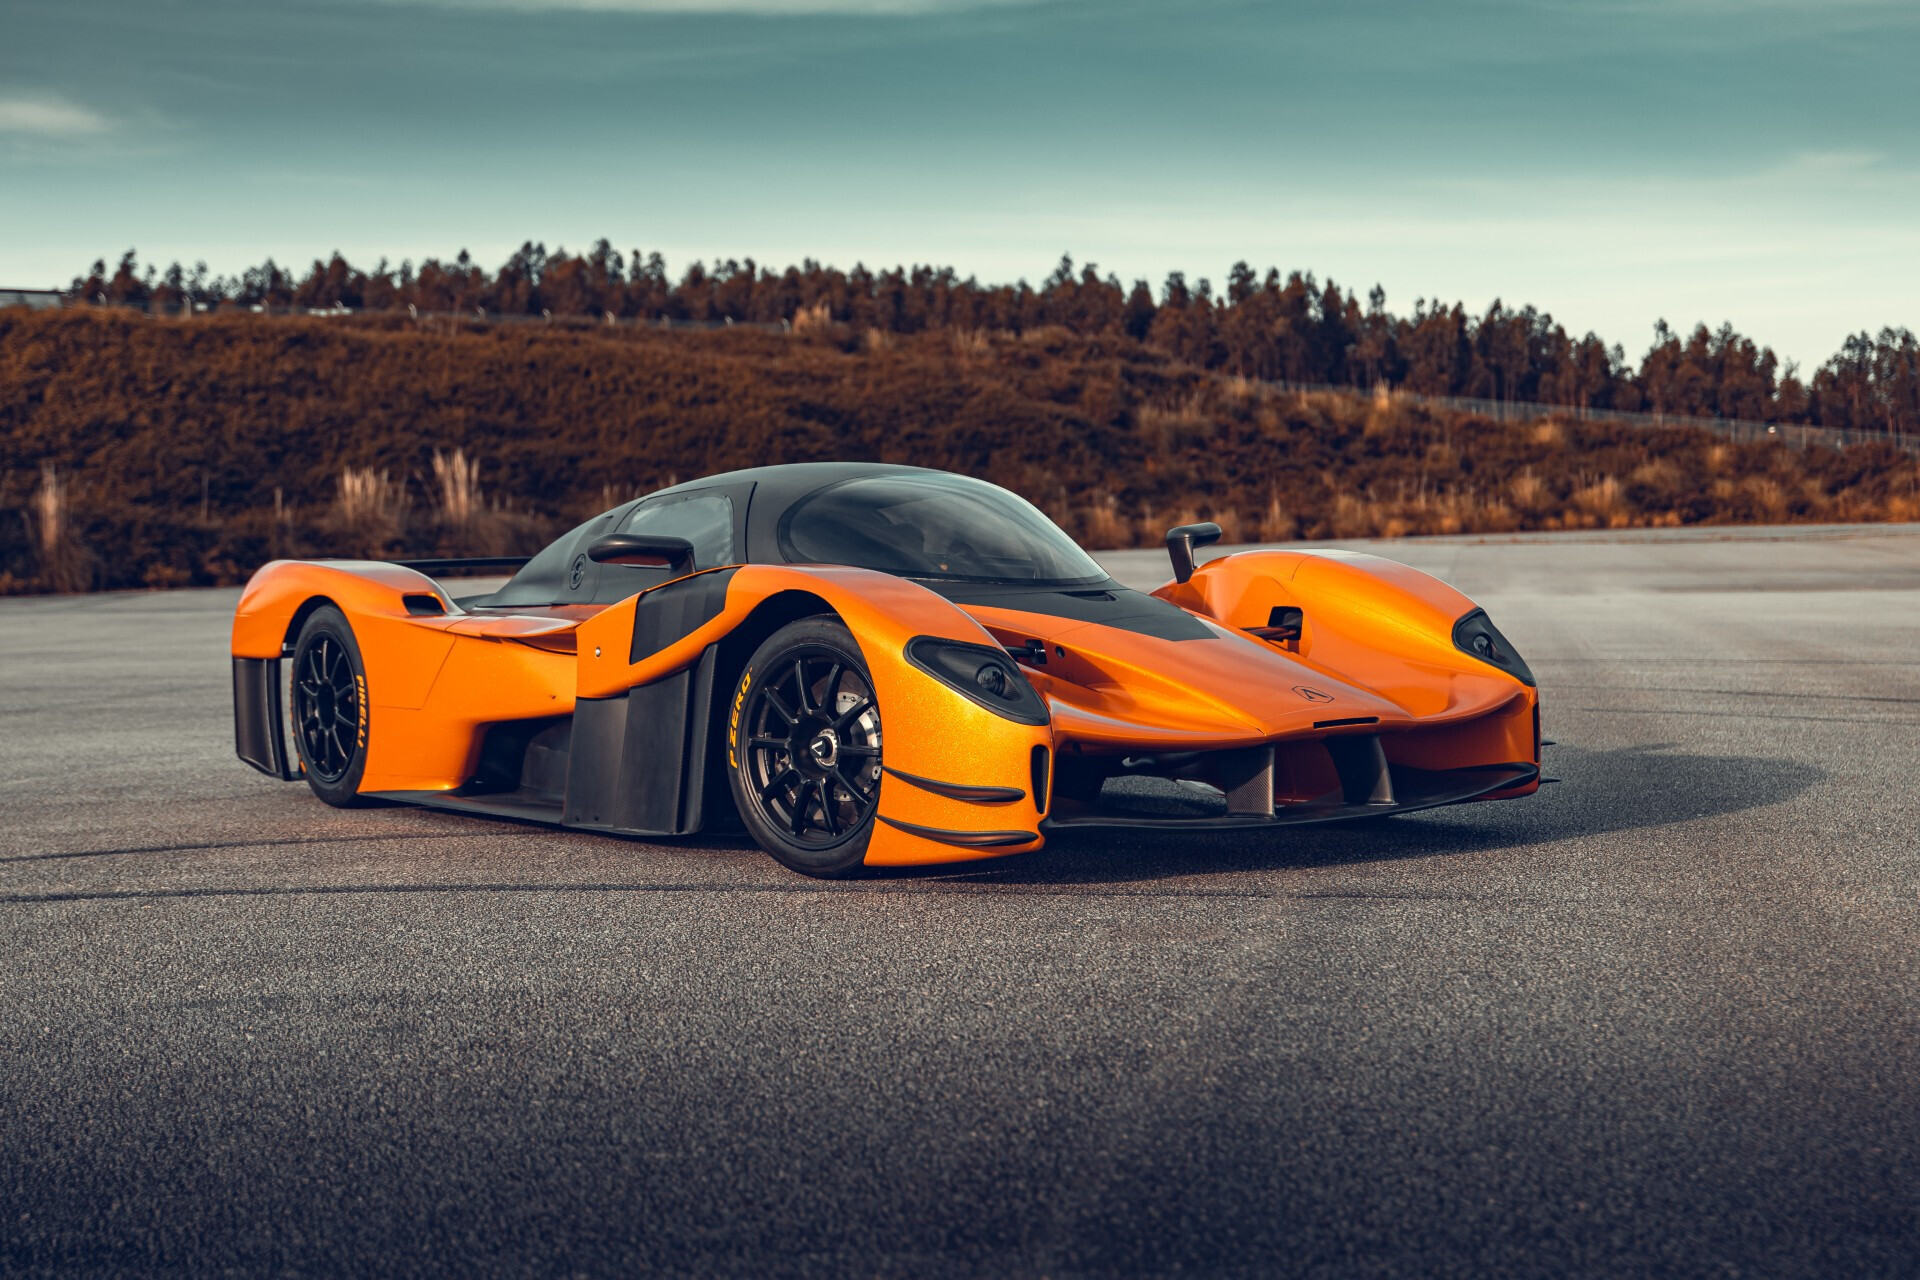 Furia, the Portuguese super sports car will be priced at 1.6 million euros